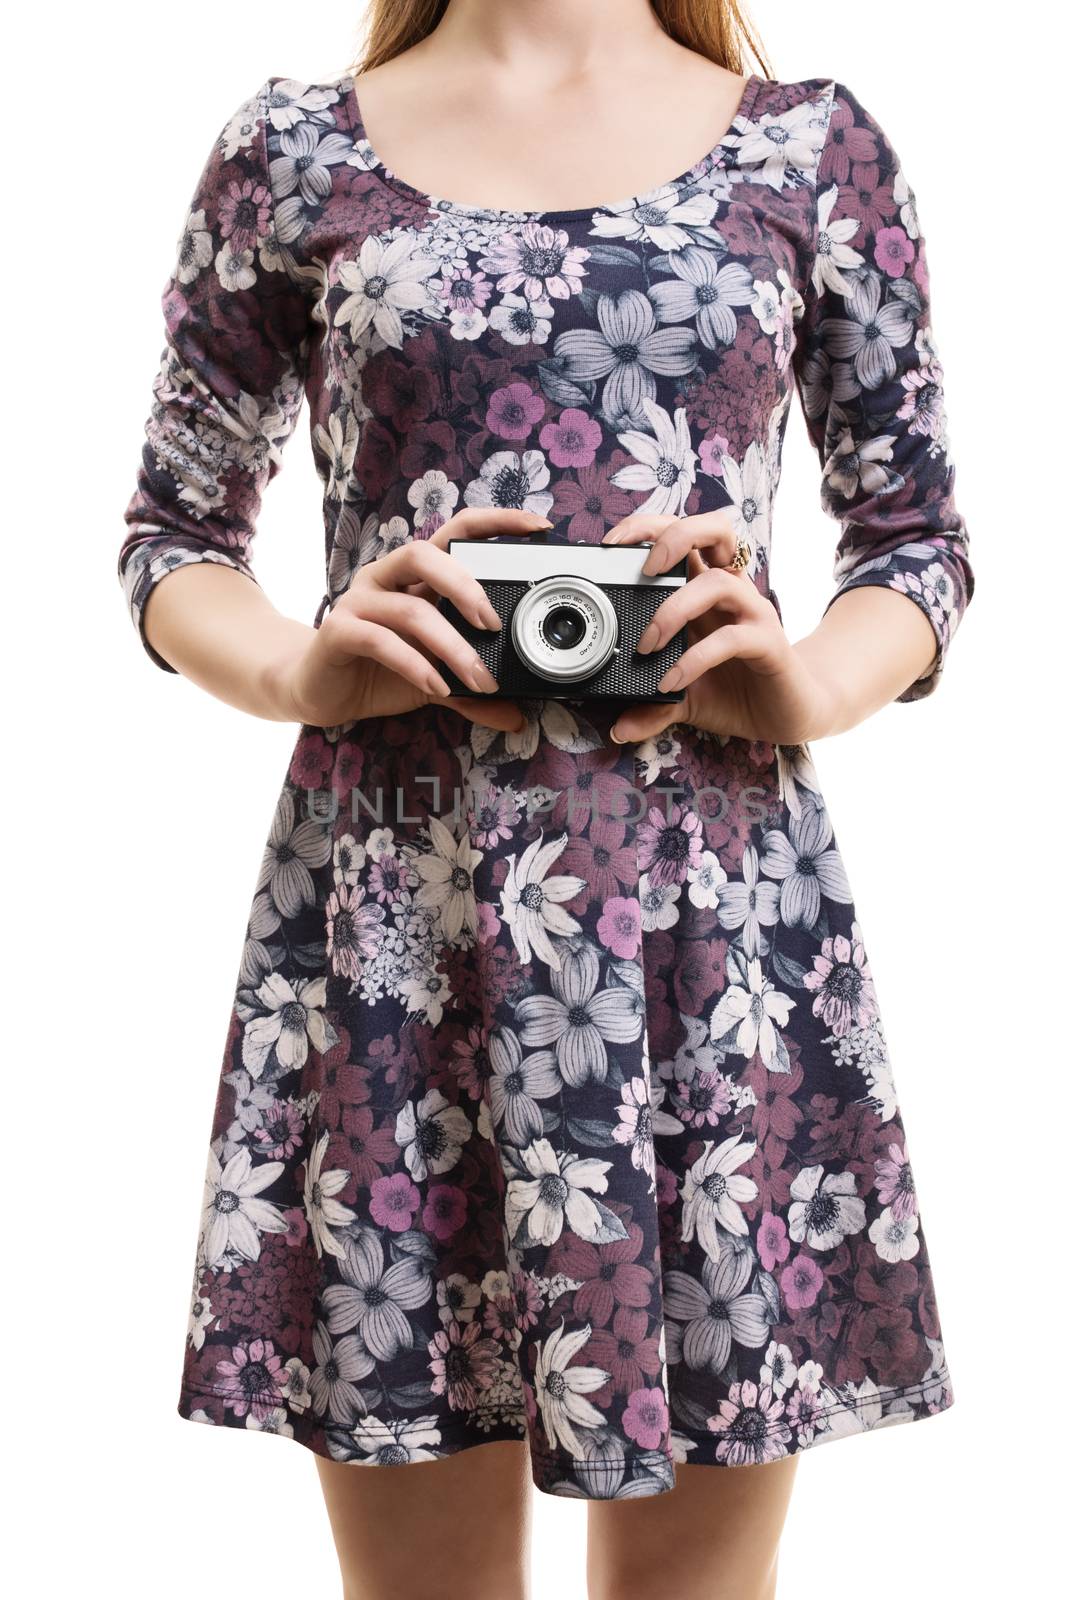 Girl in a colorful dress hodling a vintage camera by Mendelex